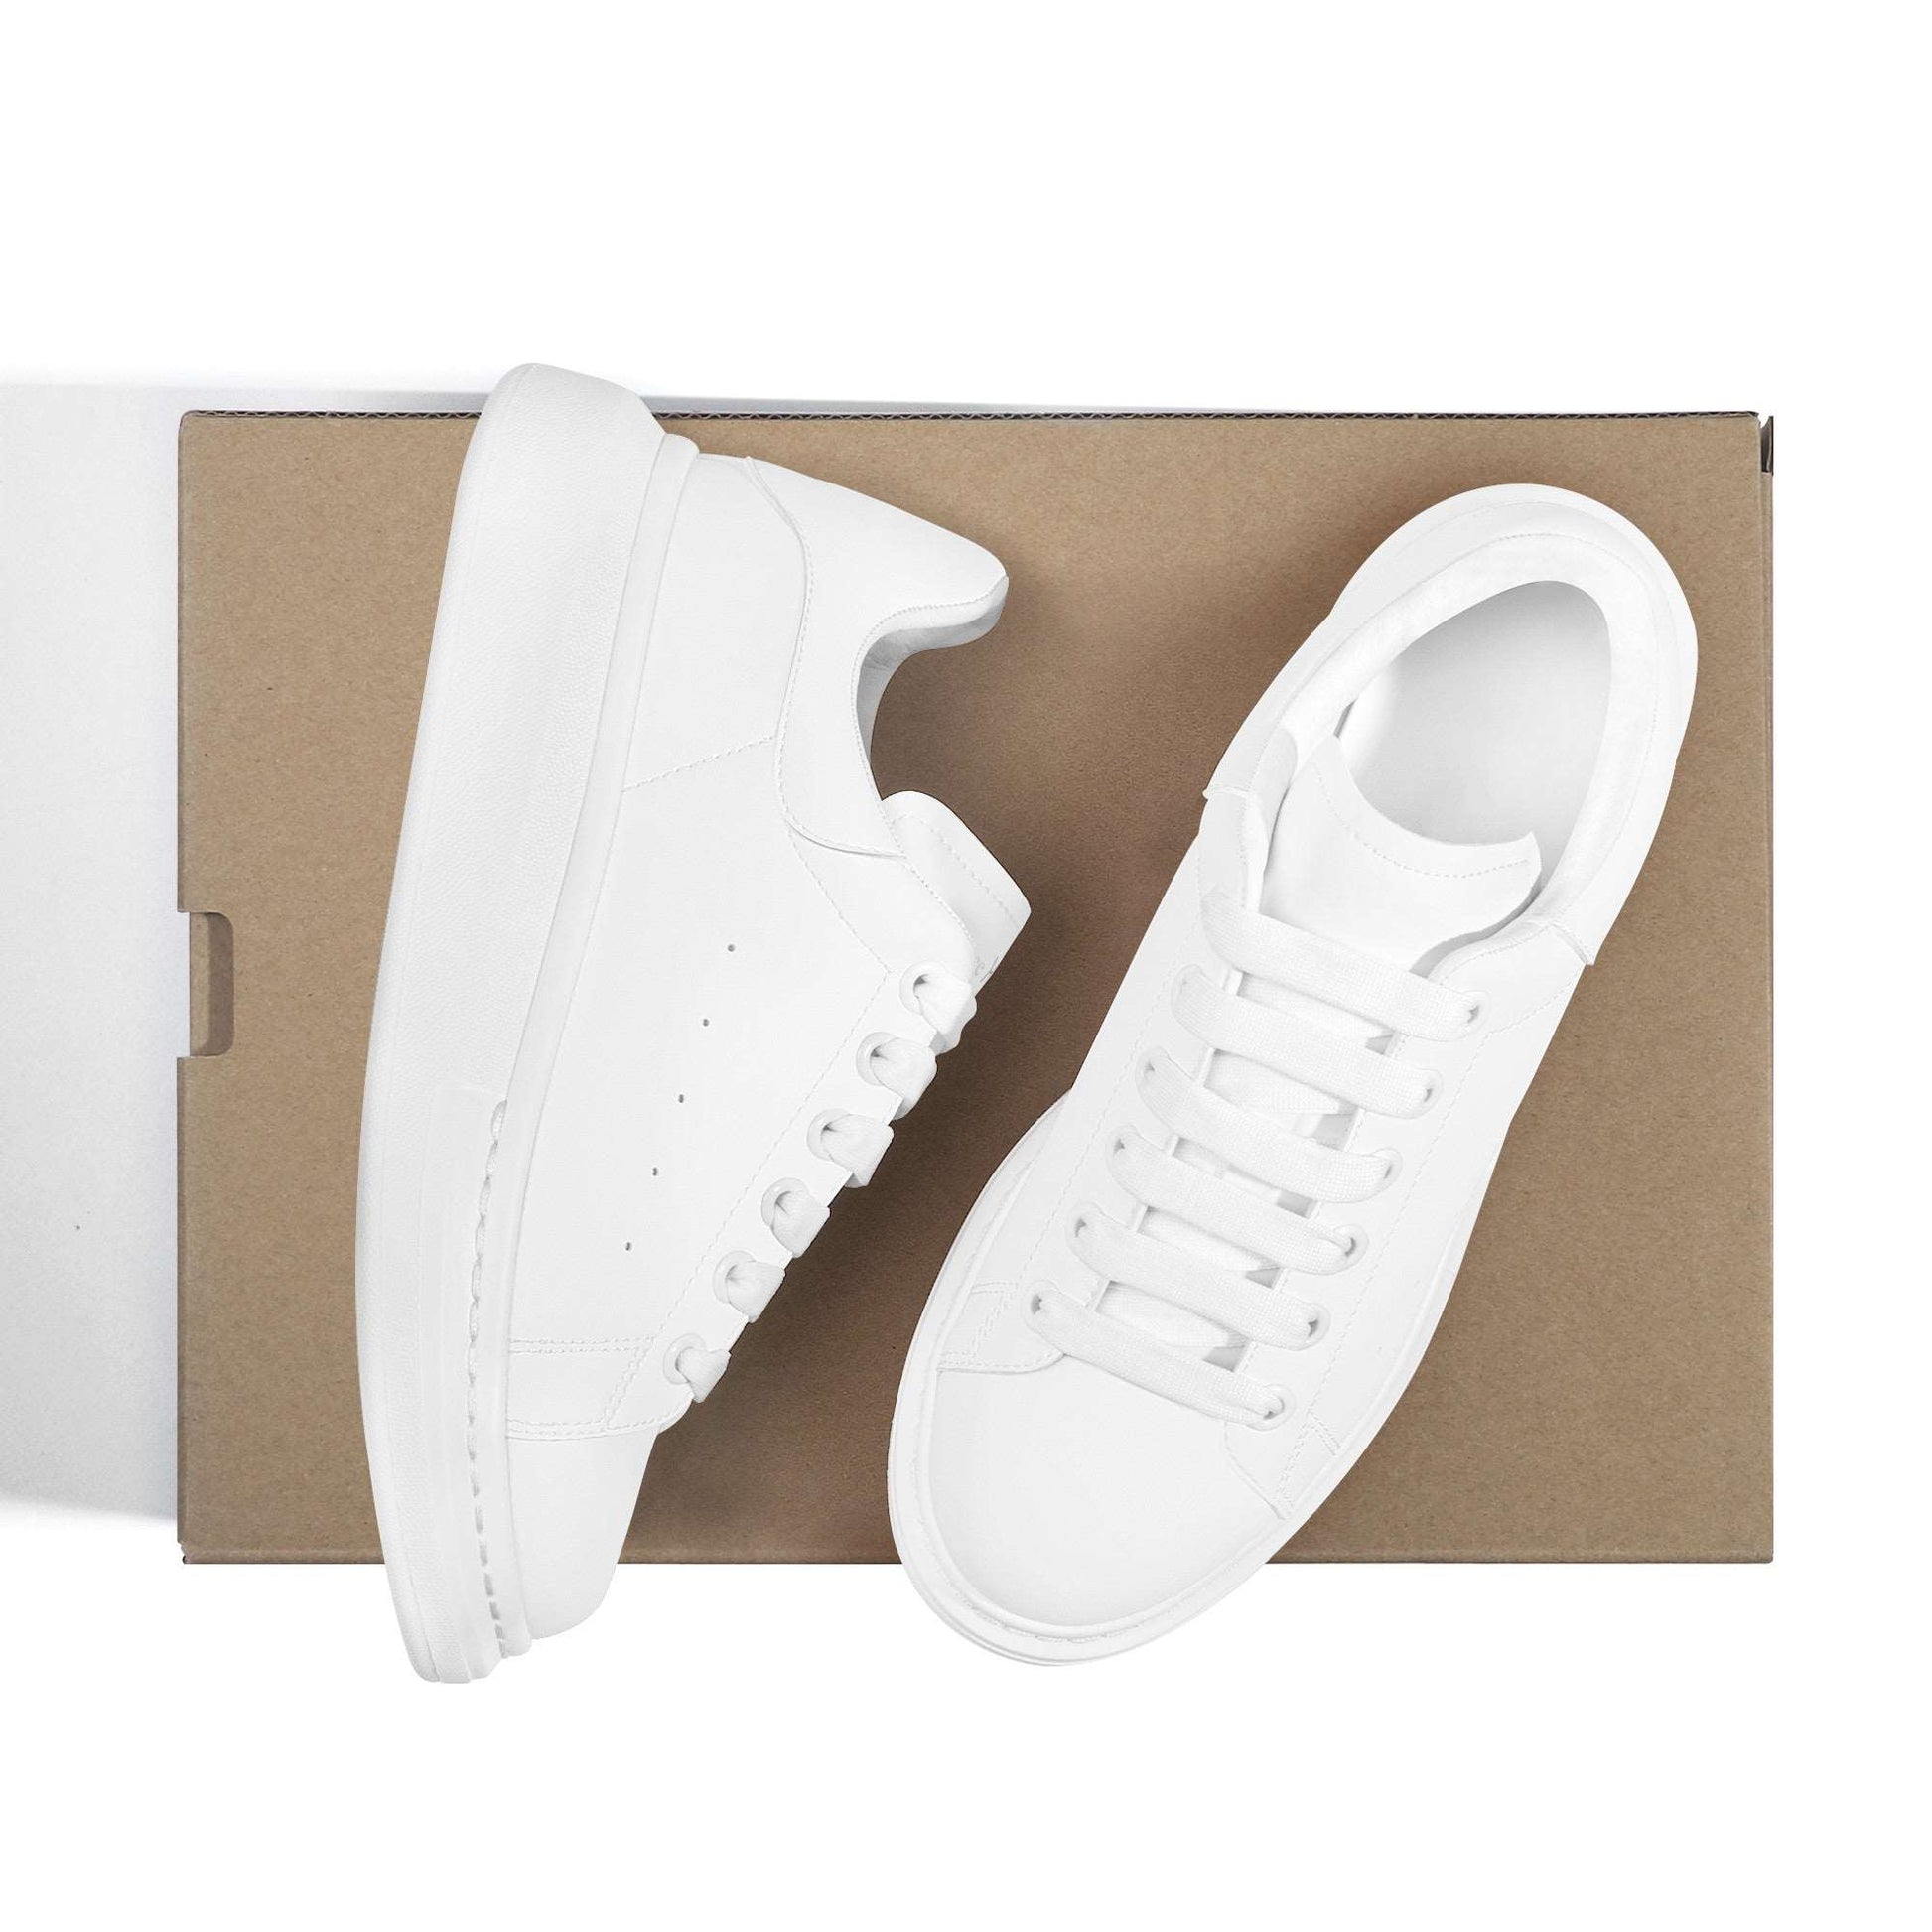 Create Your Own - Platform Low Top Shoes - White